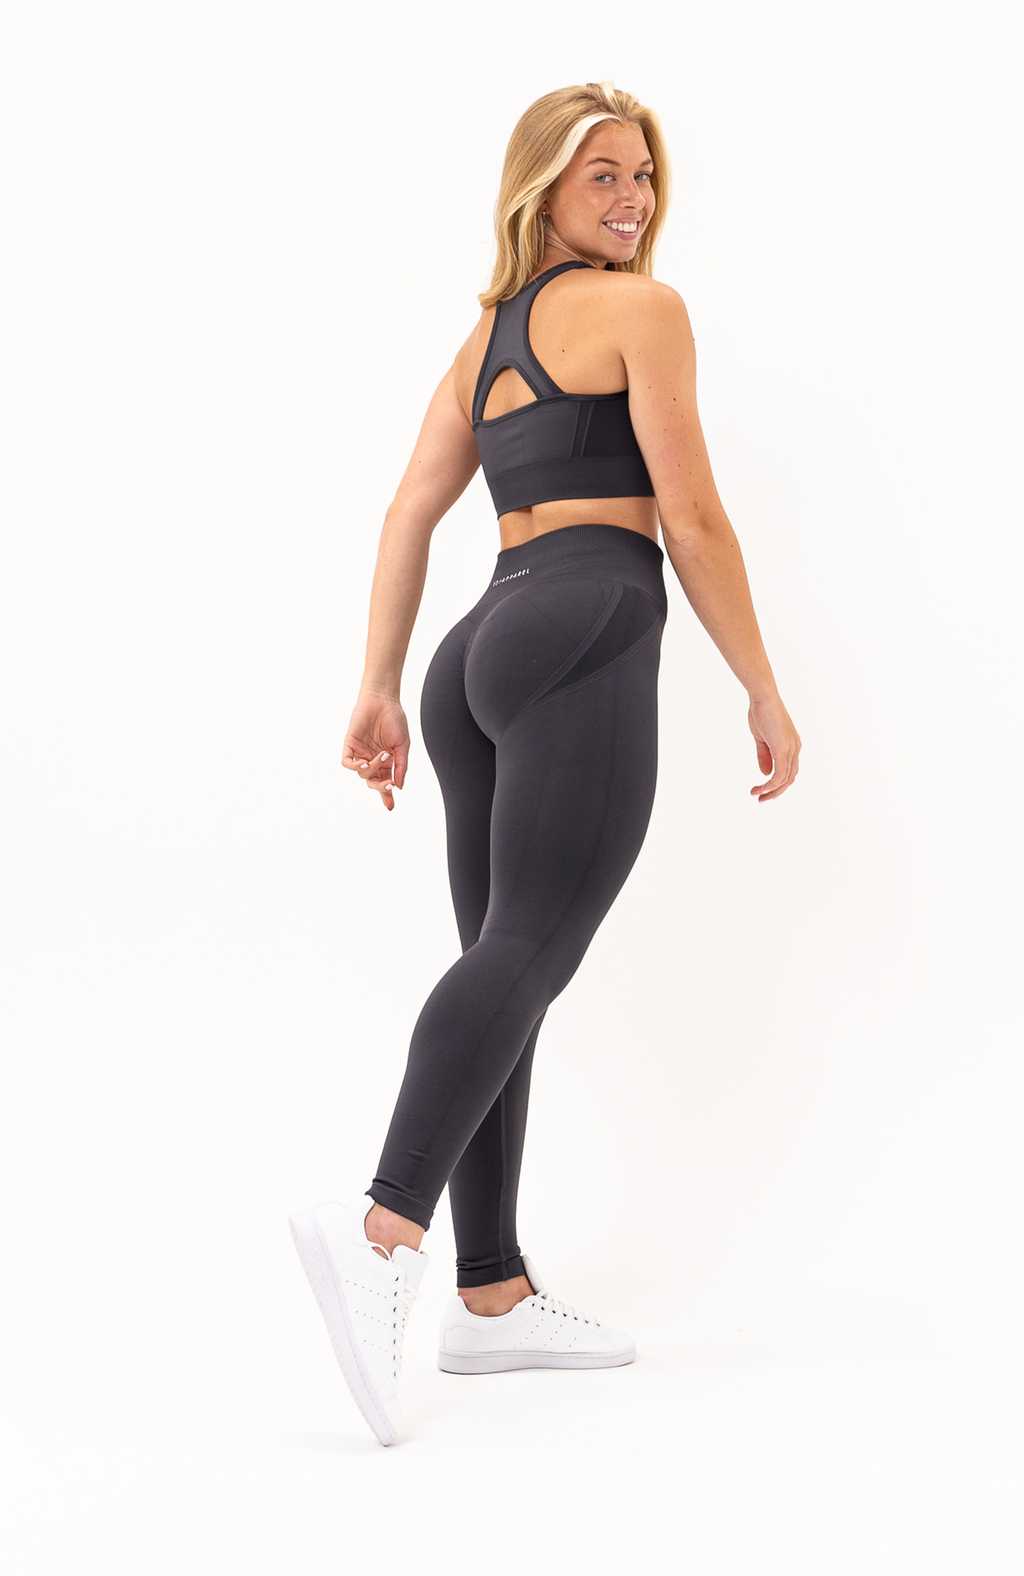 V3 Apparel Womens 2-Piece Tempo Seamless Scrunch Workout Outfit - Grey -  Gym Workout Leggings & Fitness Sports Bra